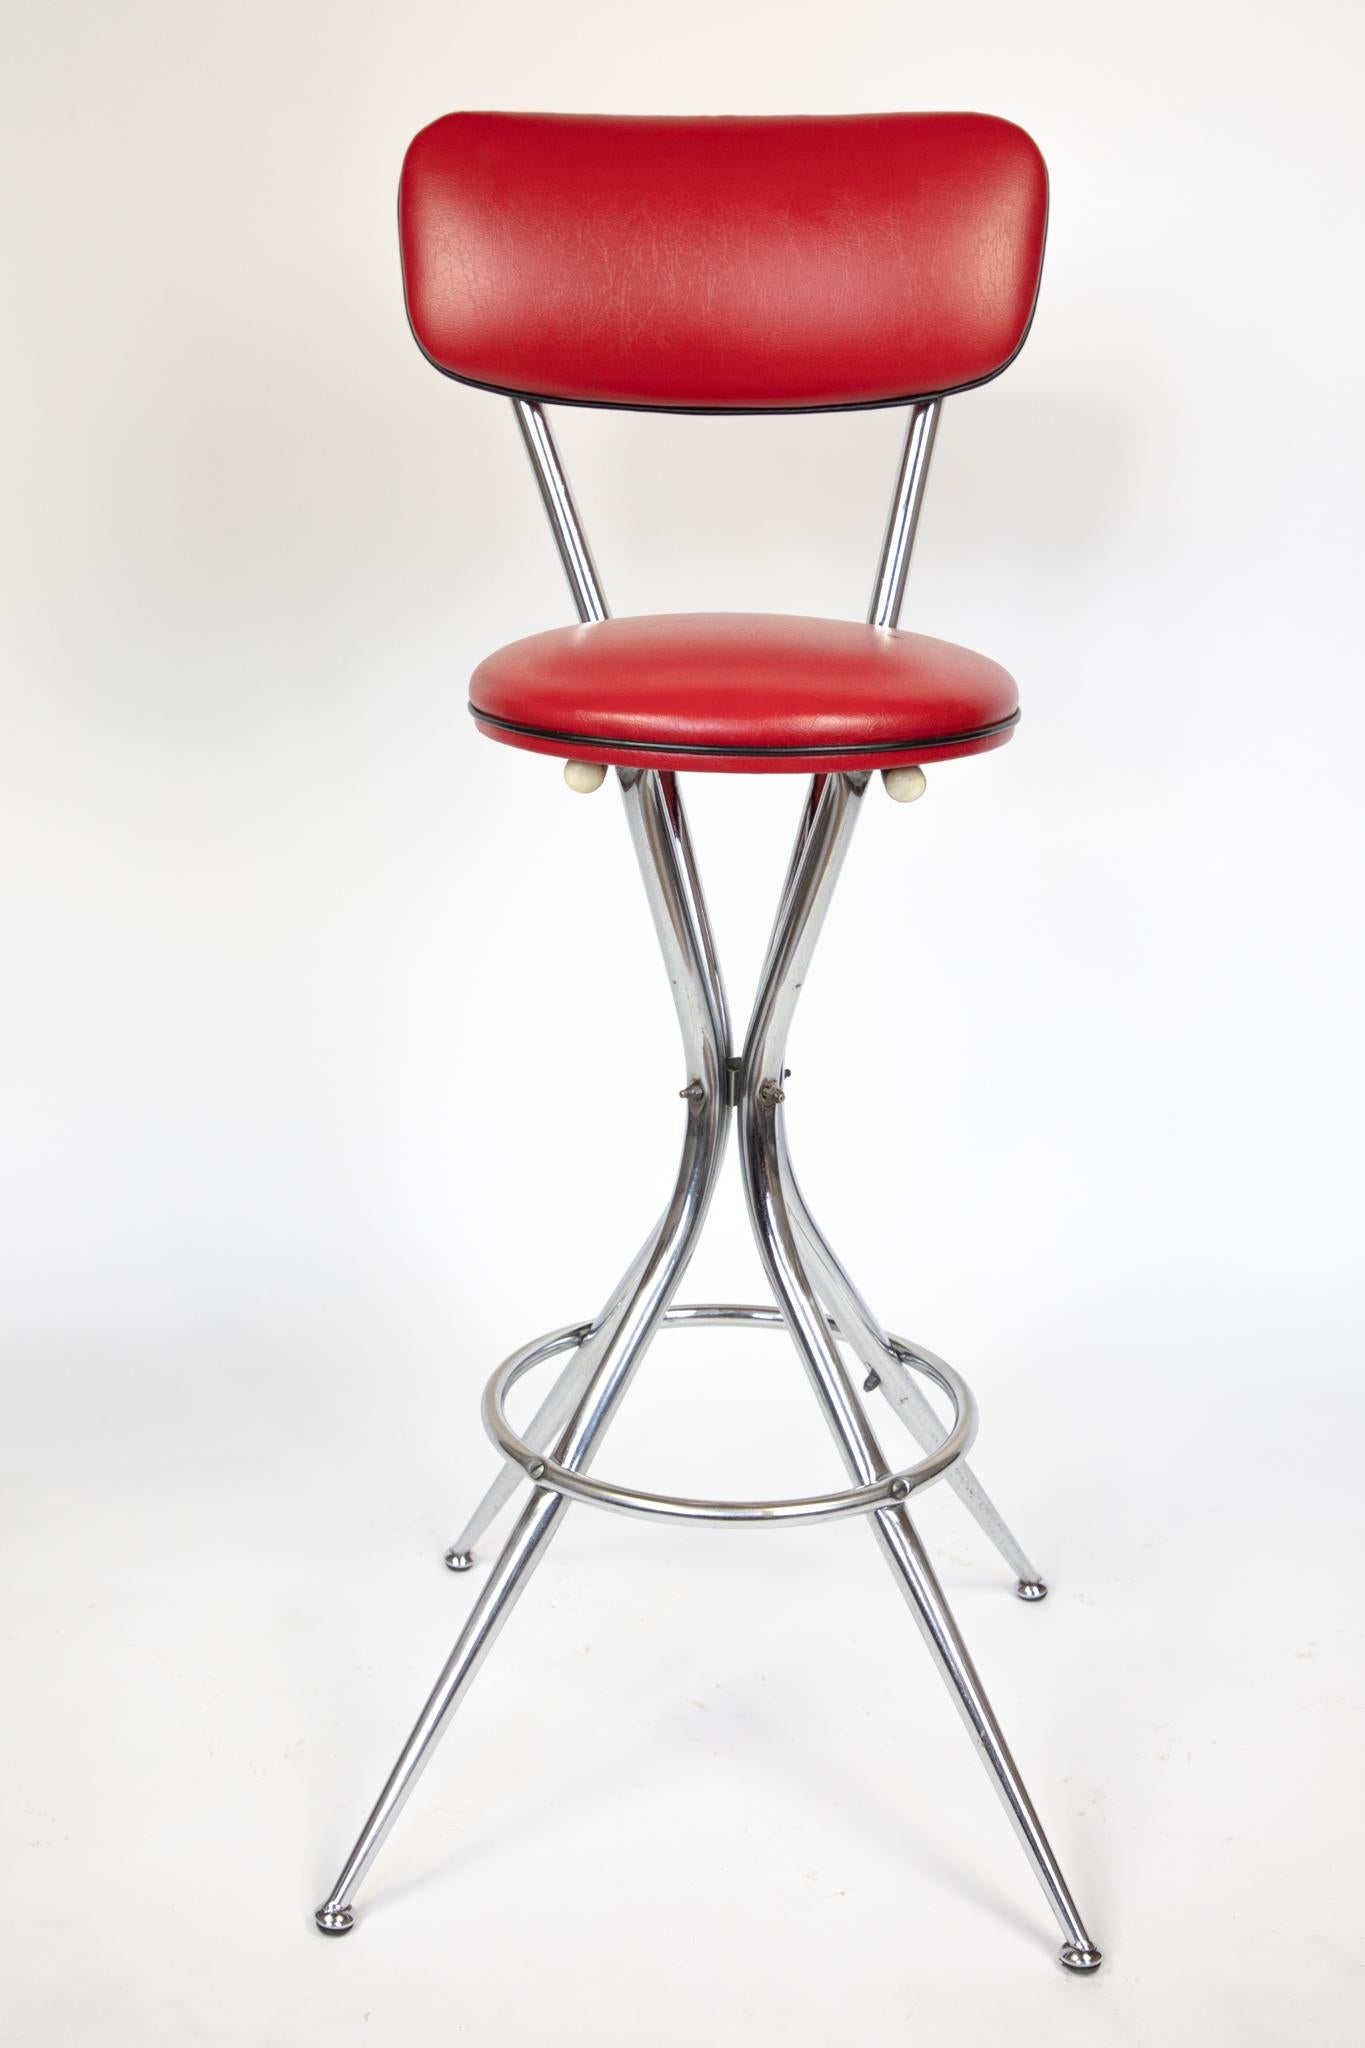 Mid Century Modern Bar Stool in Red Faux Leather, Chrome , Italy, 1950s

From the ice cream shops of the 50s to the mom-and-pop diners of today, diner bar stools are iconic. This stylish bar stool is a perfect combination of steel construction and